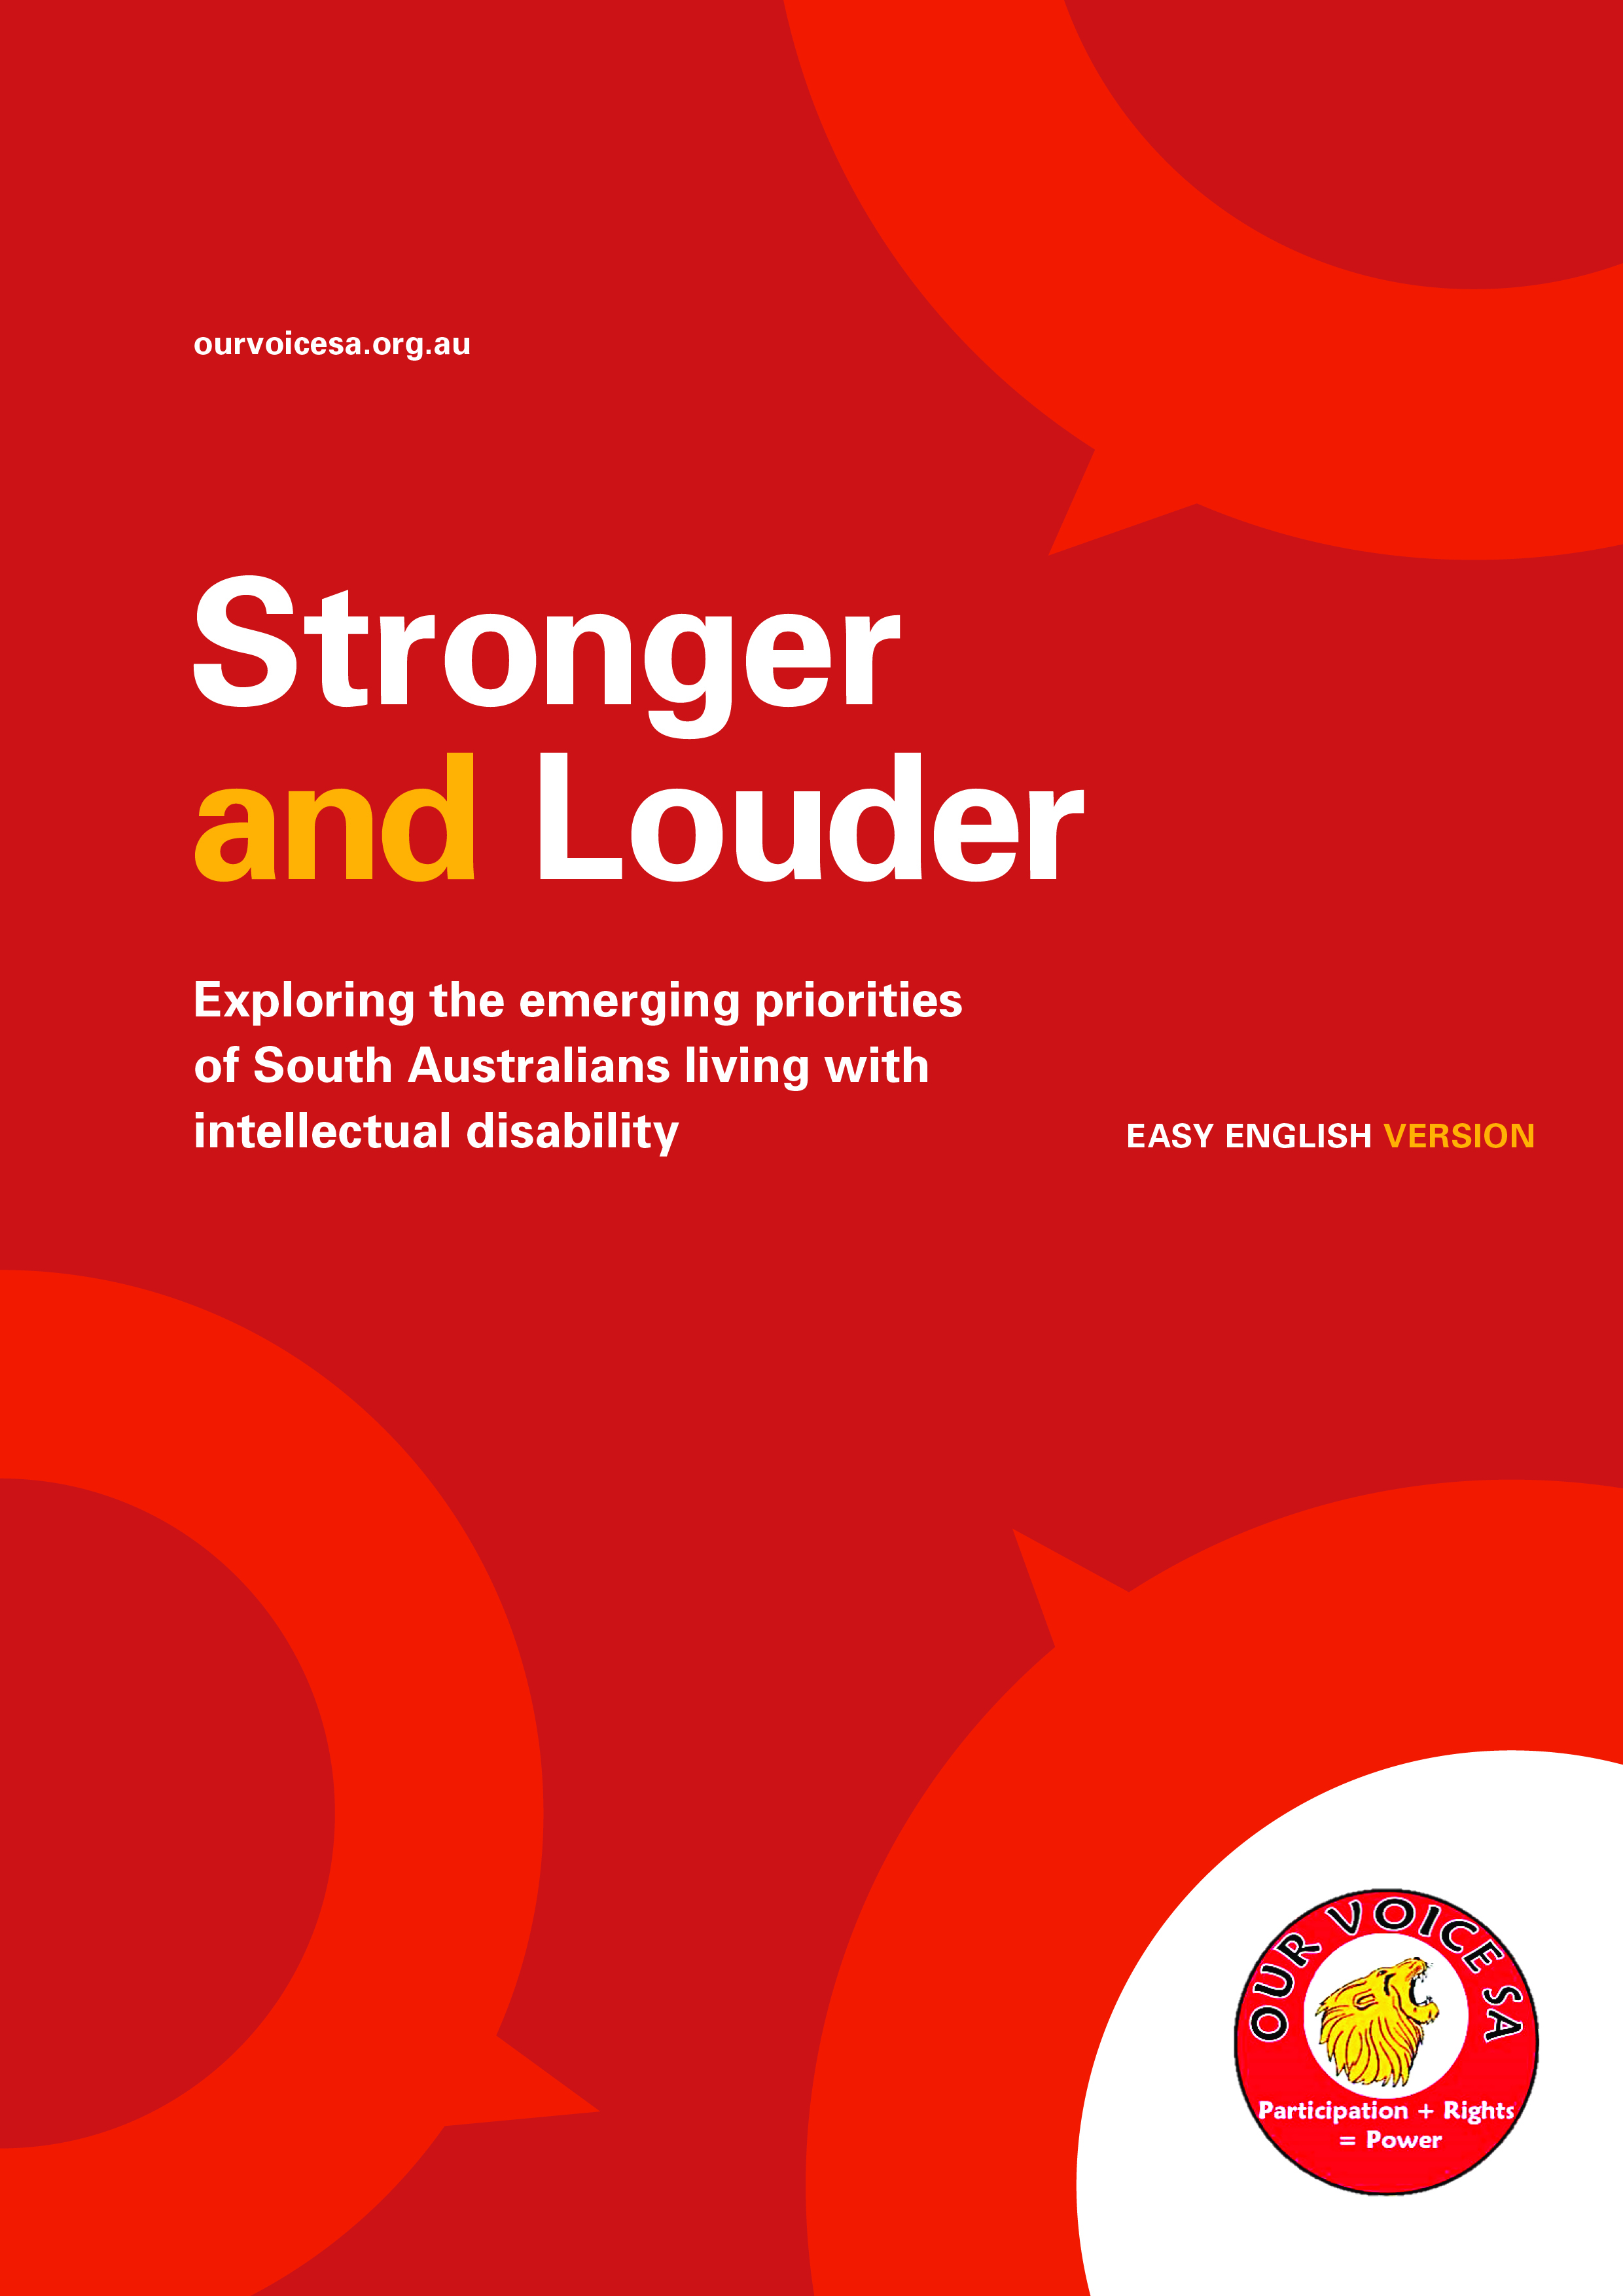 Photo shows the cover of the Easy English version of Our Voice SA's Needs Analysis report. Text on cover says "Stronger and Louder. Exploring the emerging priorities of South Australians living with intellectual disability".